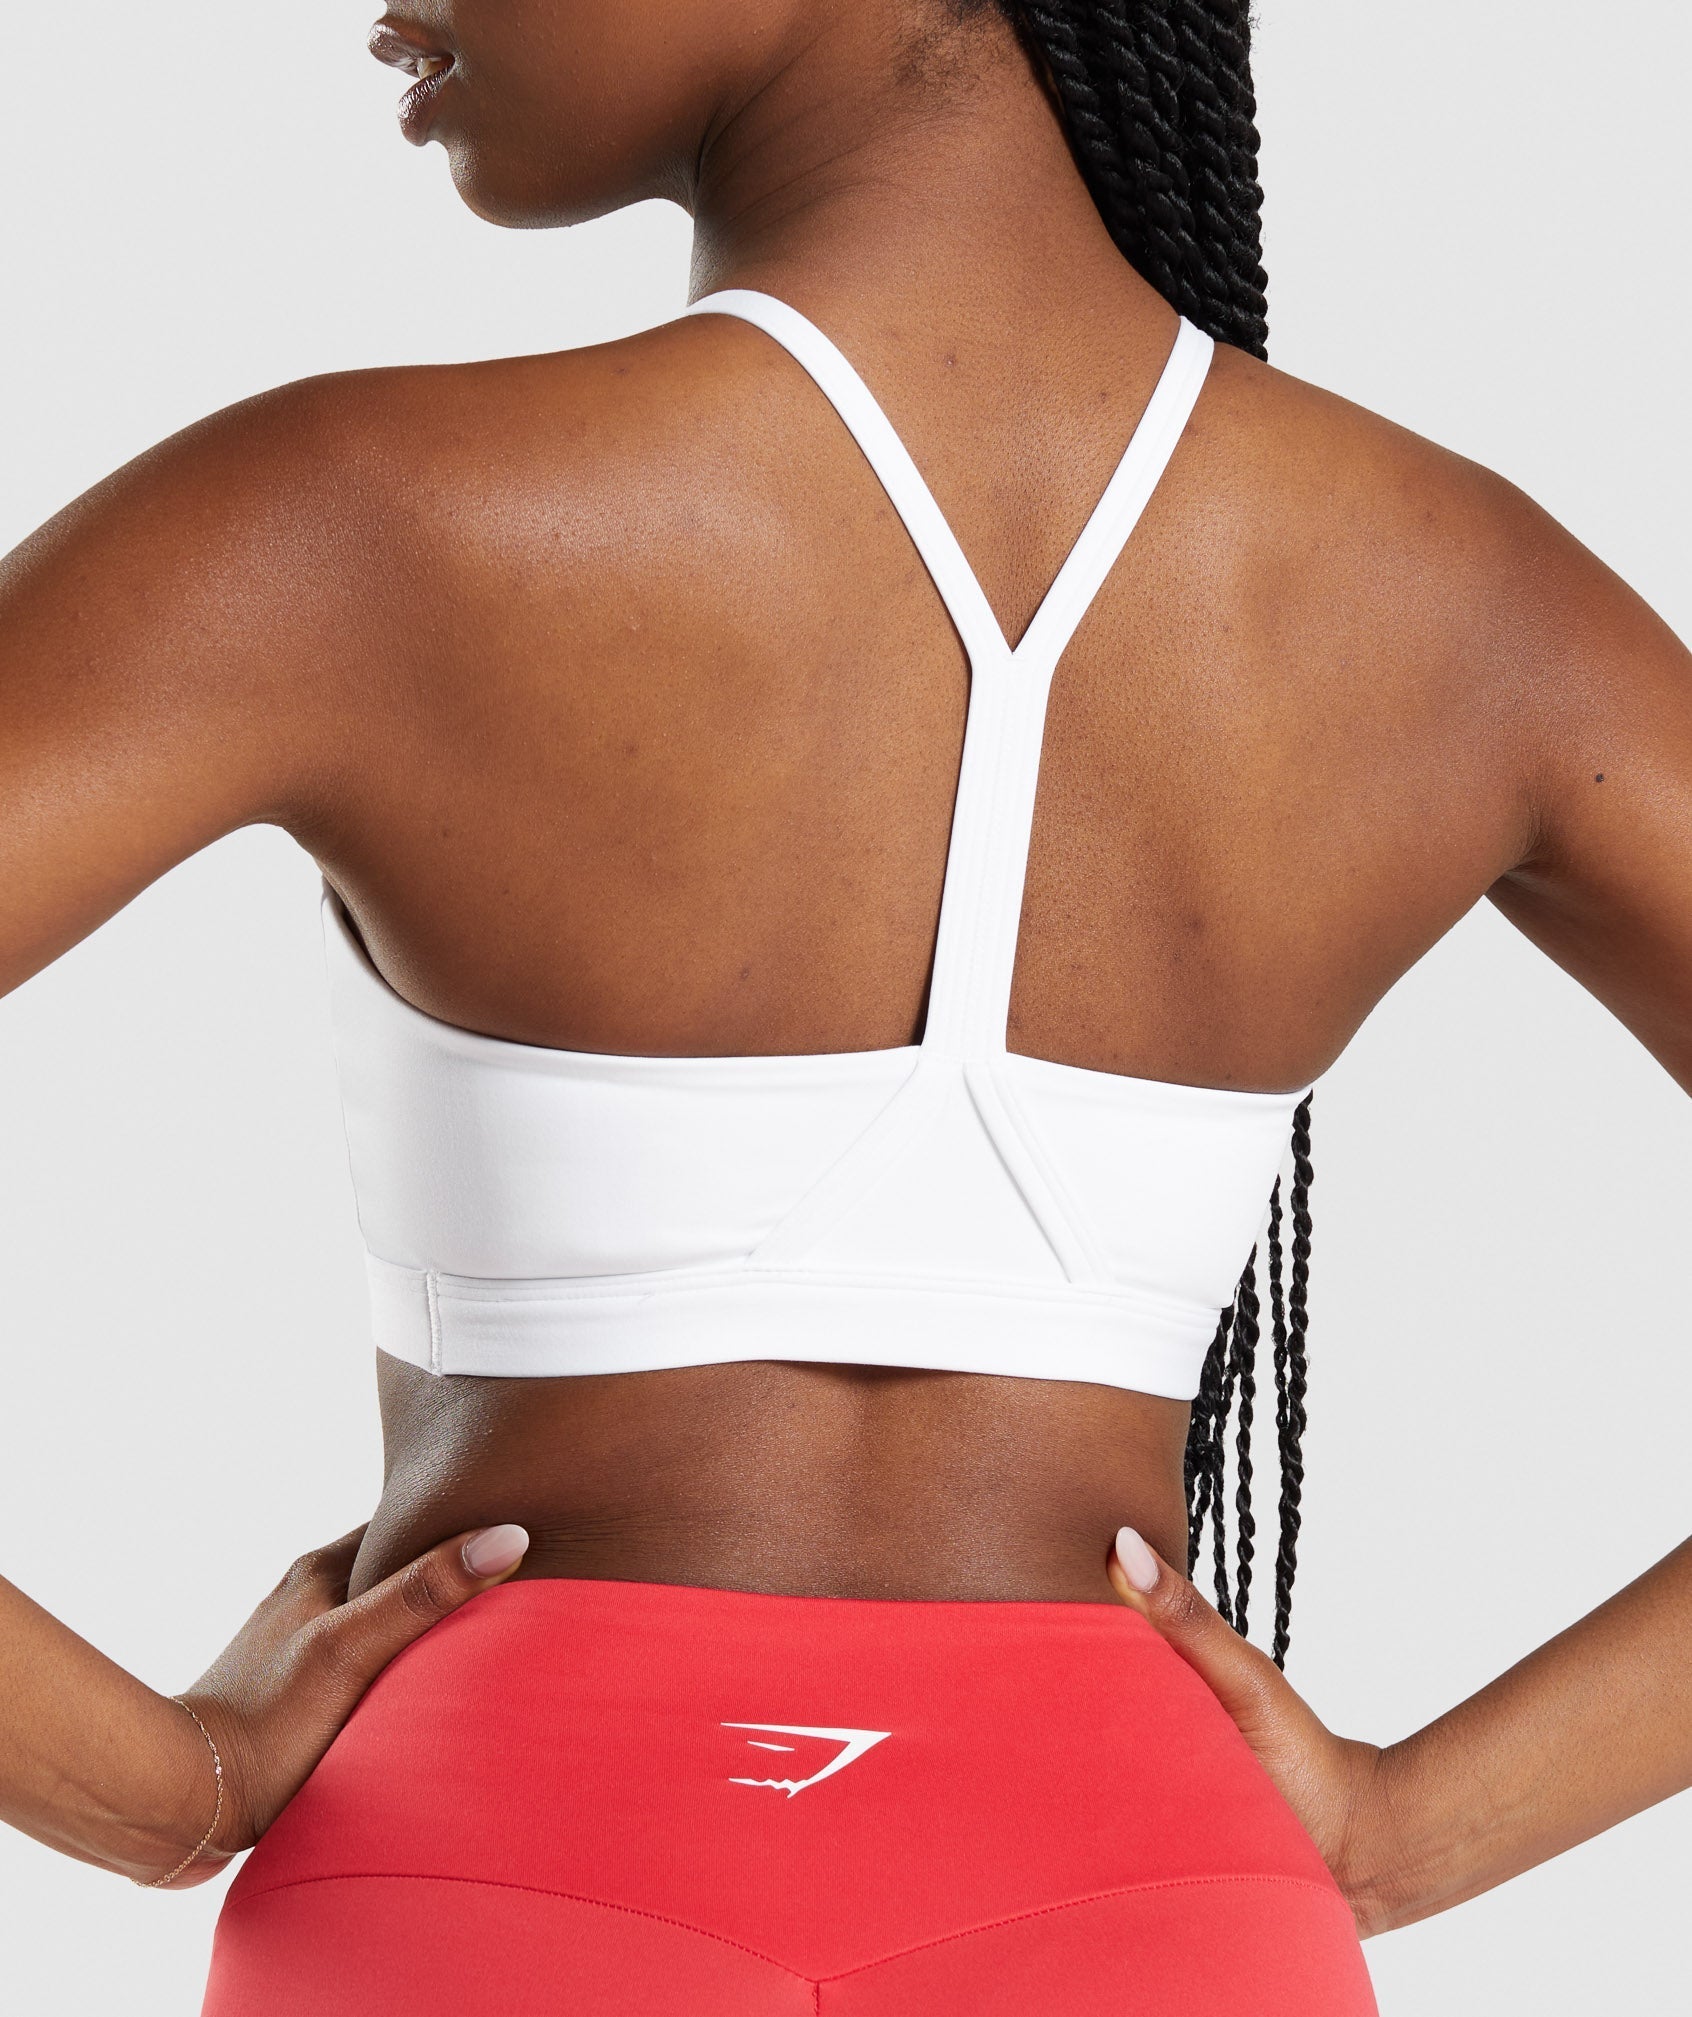 Womens V Neck Sports Bra Tight, Comfortable, And Stylish Fitness Lingerie  For Gym, Running, Or Workouts L220727 From Yanqin03, $11.94